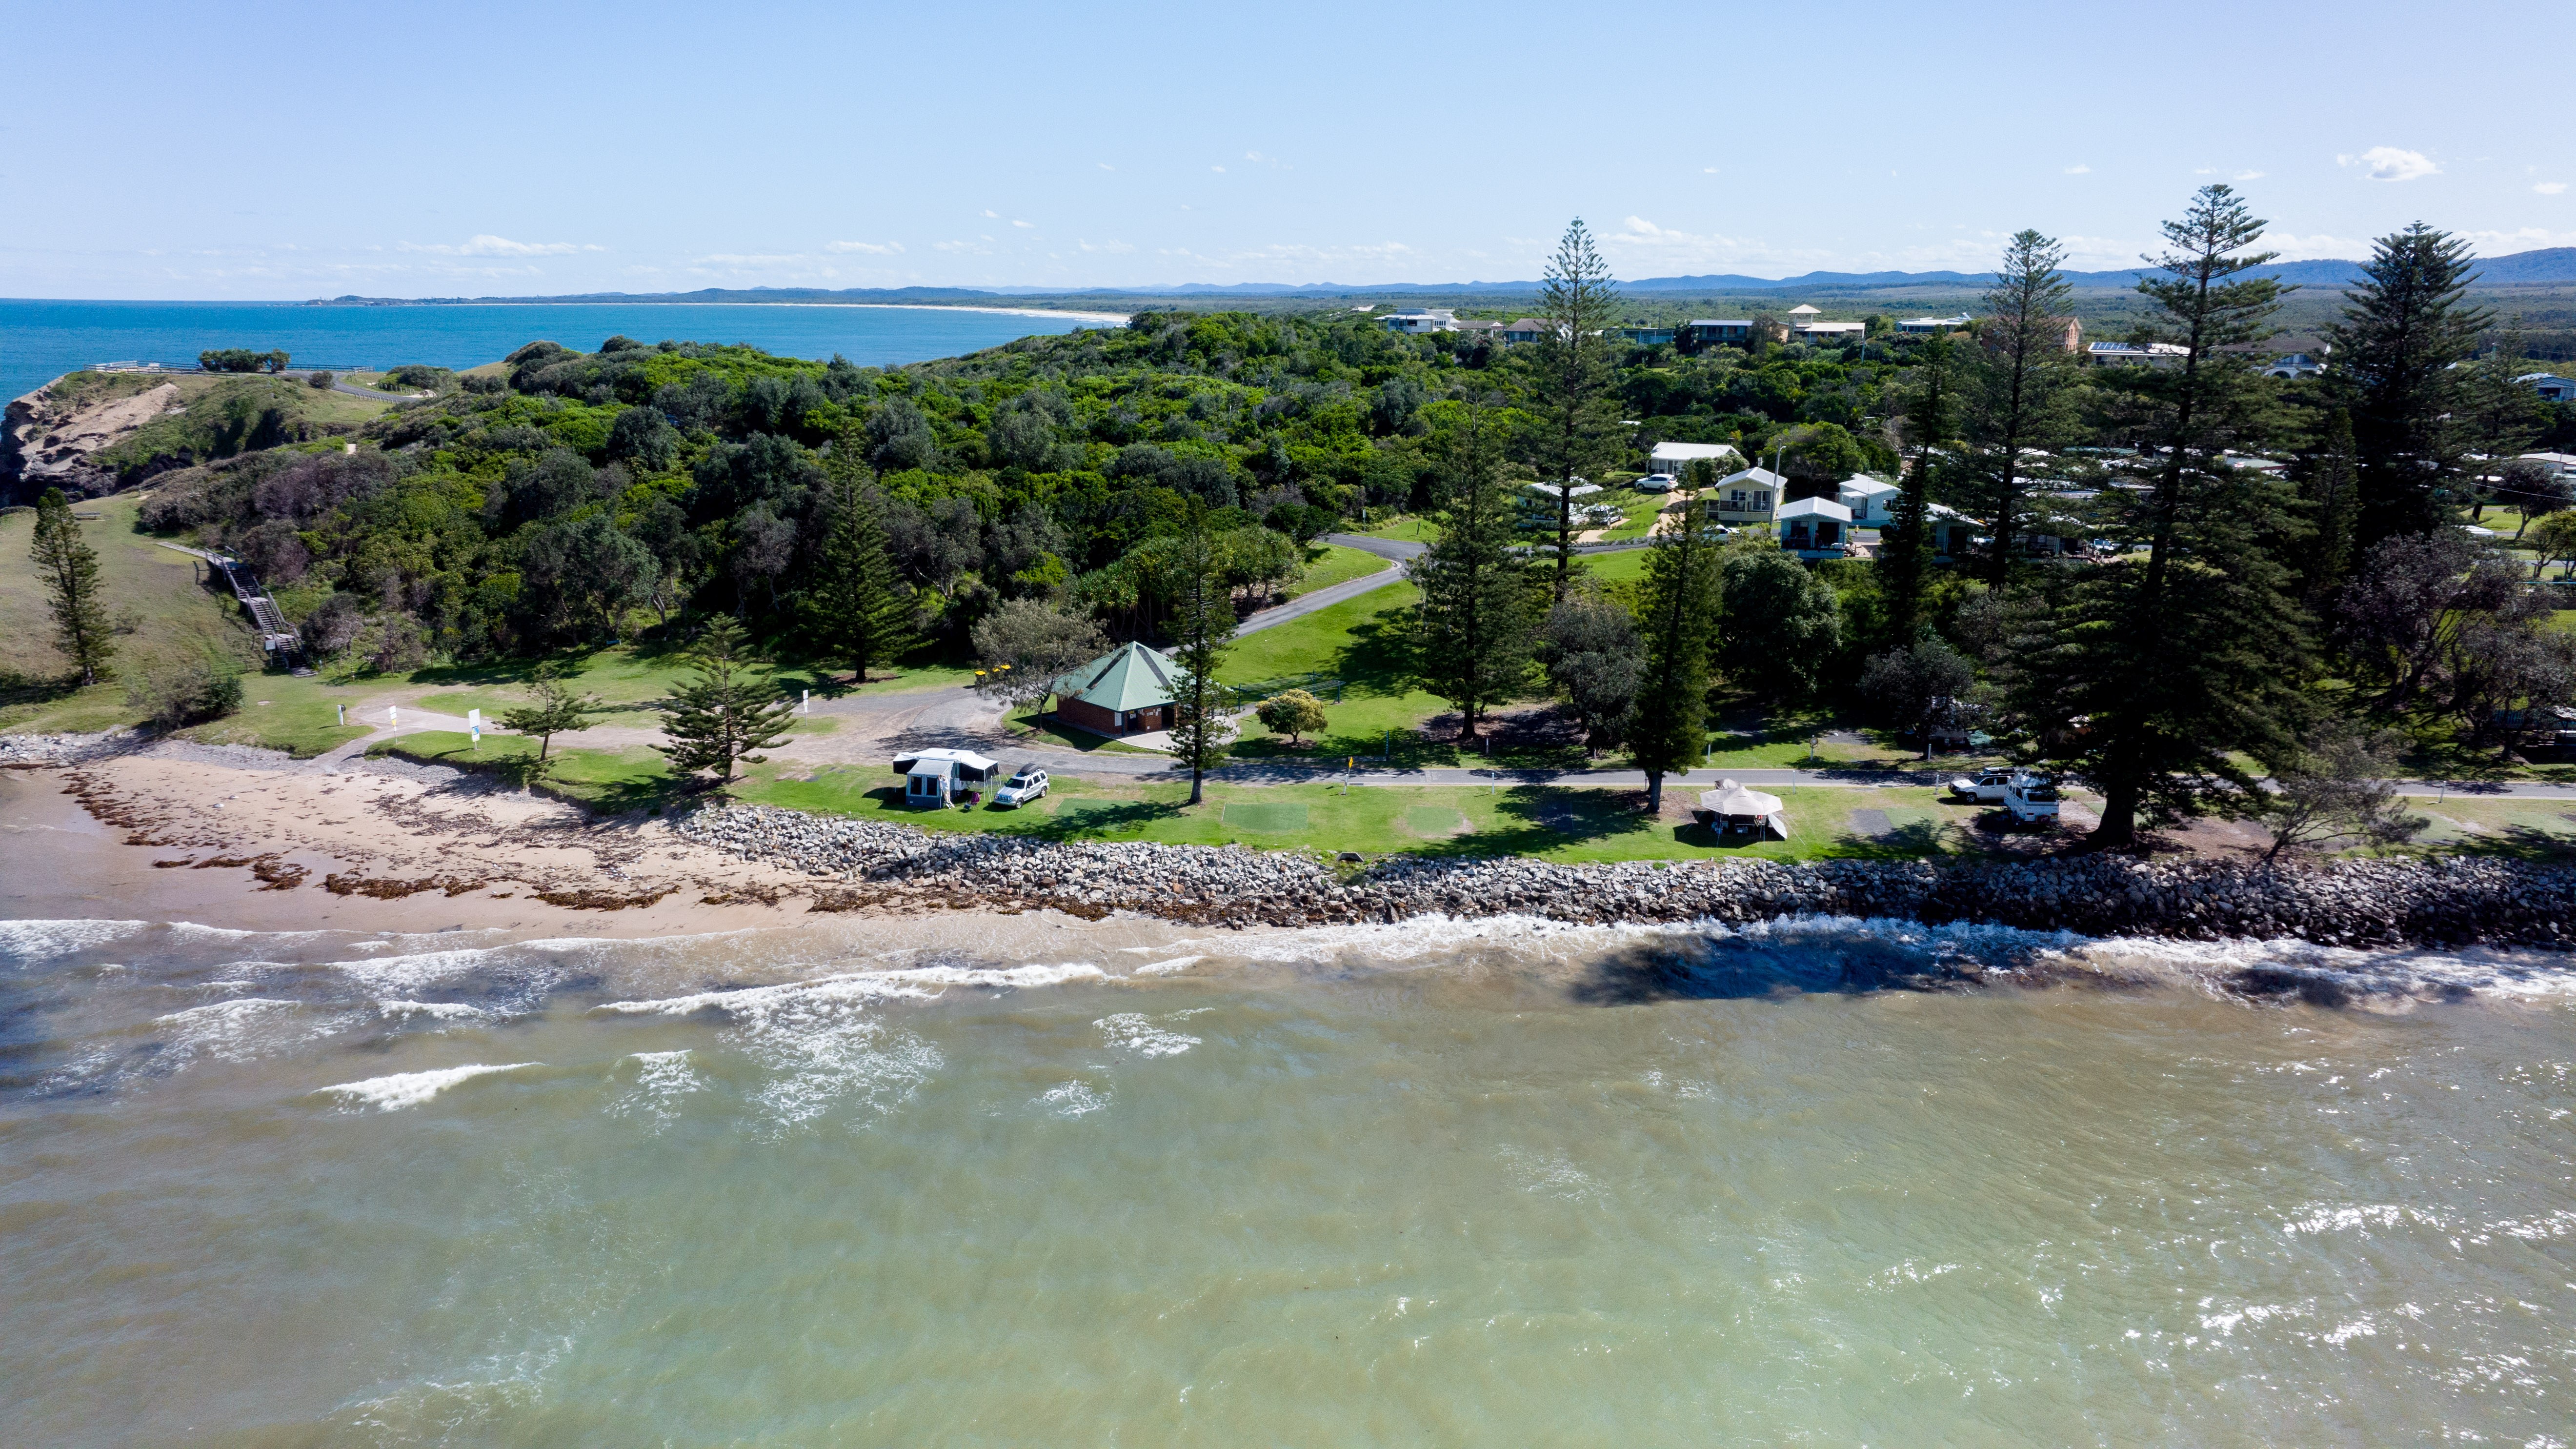 Camping Sites & Accommodation North Coast NSW